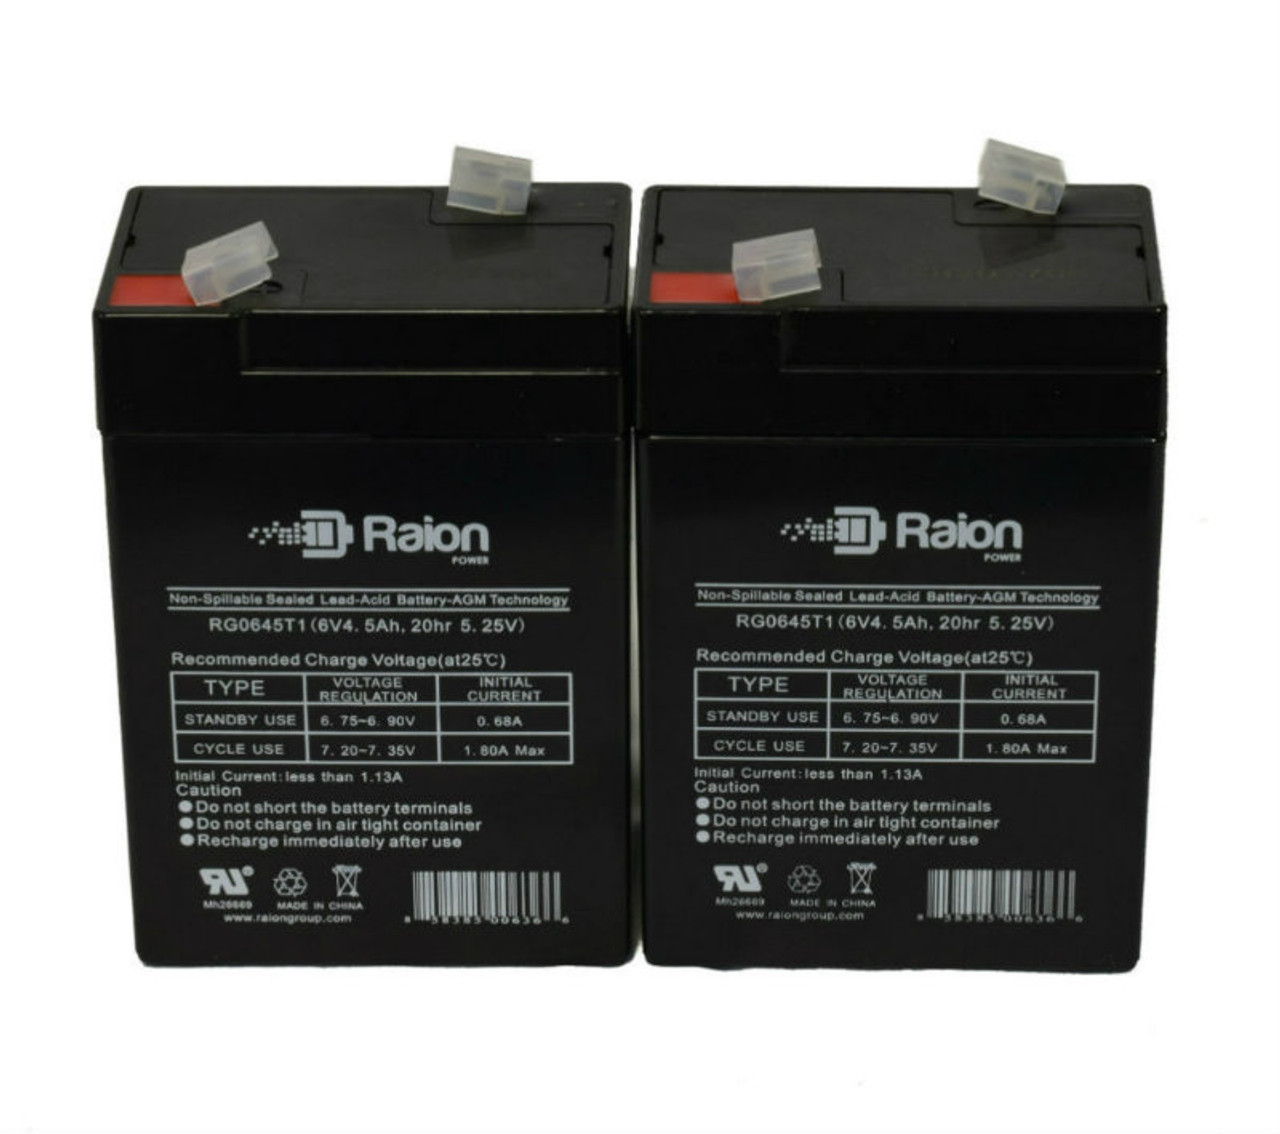 Raion Power 6V 4.5Ah Replacement Emergency Light Battery for Lithonia ELB-06042 - 2 Pack